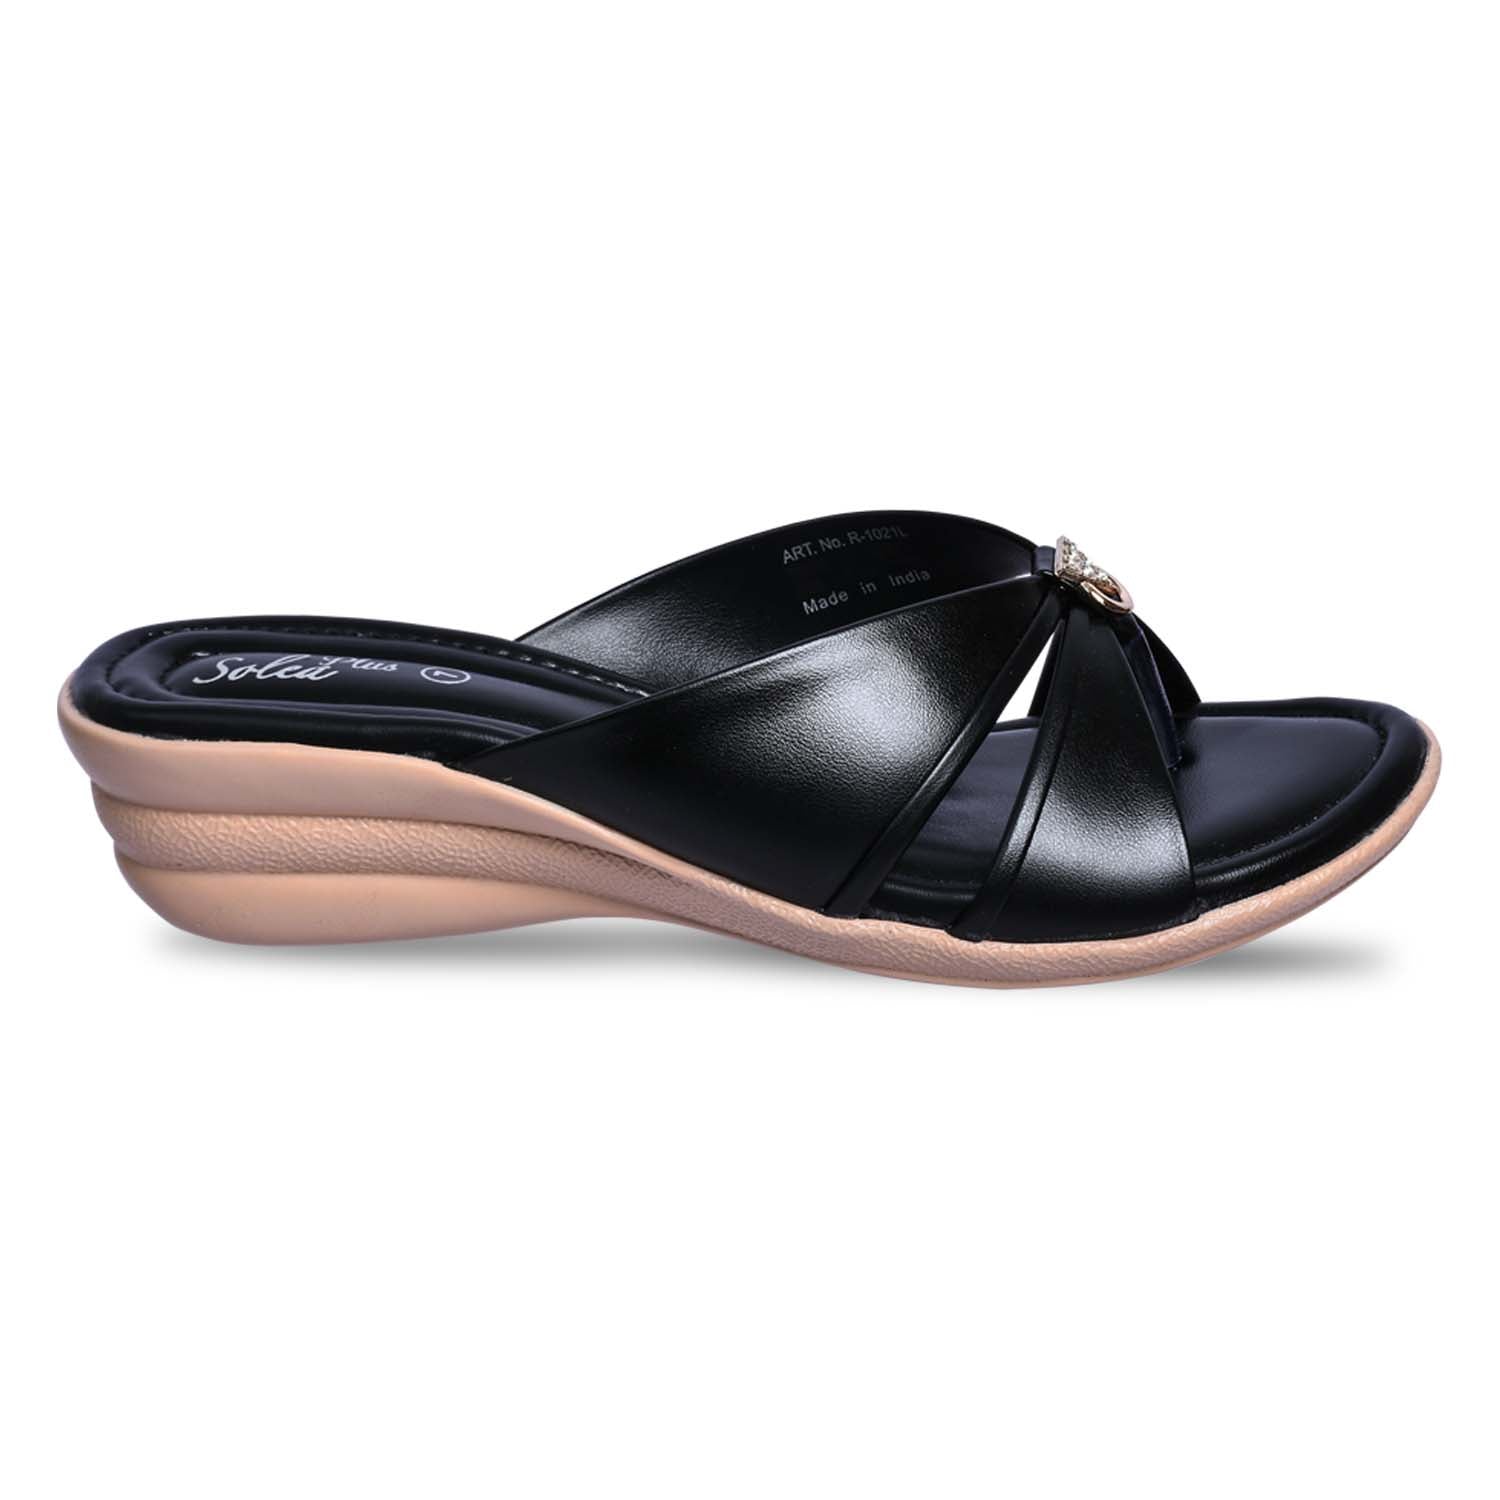 Paragon R1021L Women Sandals | Casual &amp; Formal Sandals | Stylish, Comfortable &amp; Durable | For Daily &amp; Occasion Wear